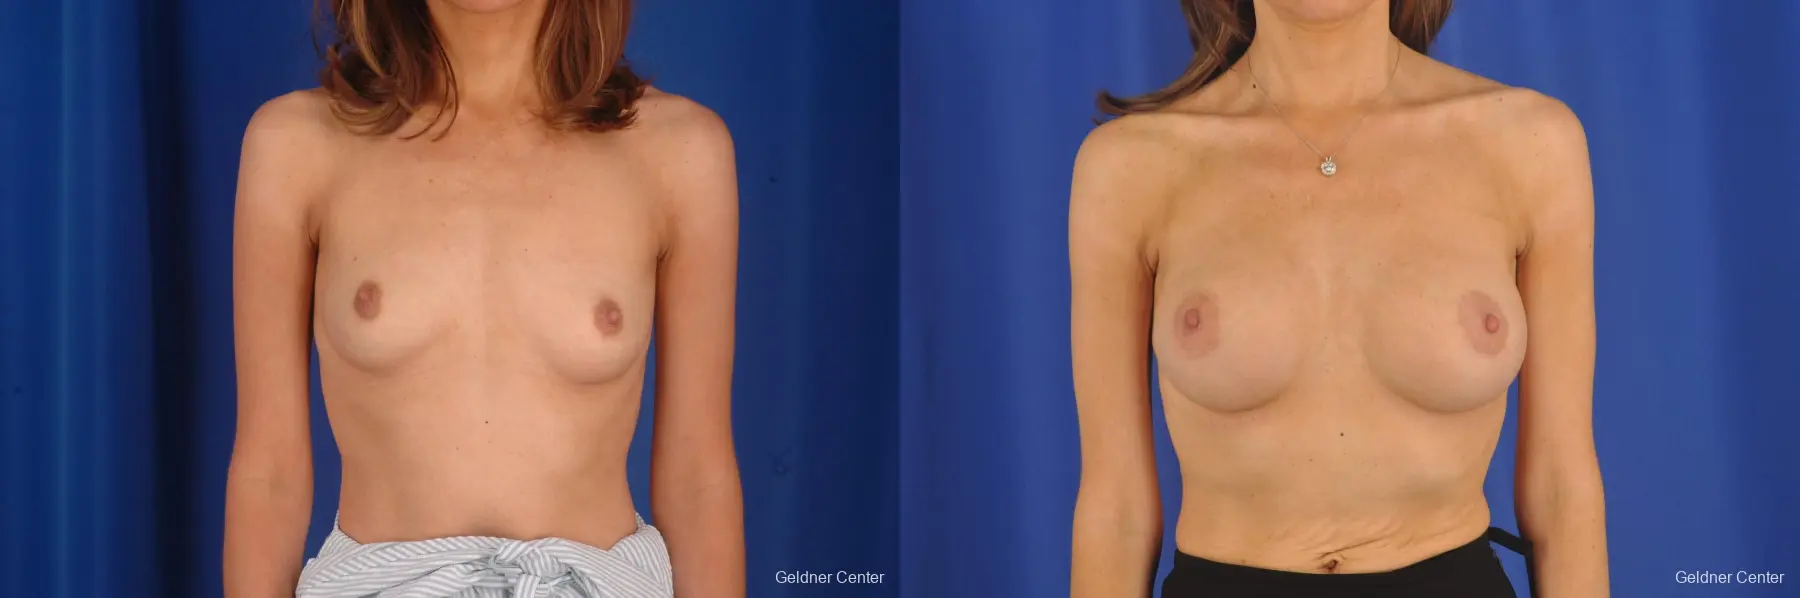 Breast Augmentation Lake Shore Dr, Chicago 2295 - Before and After 1